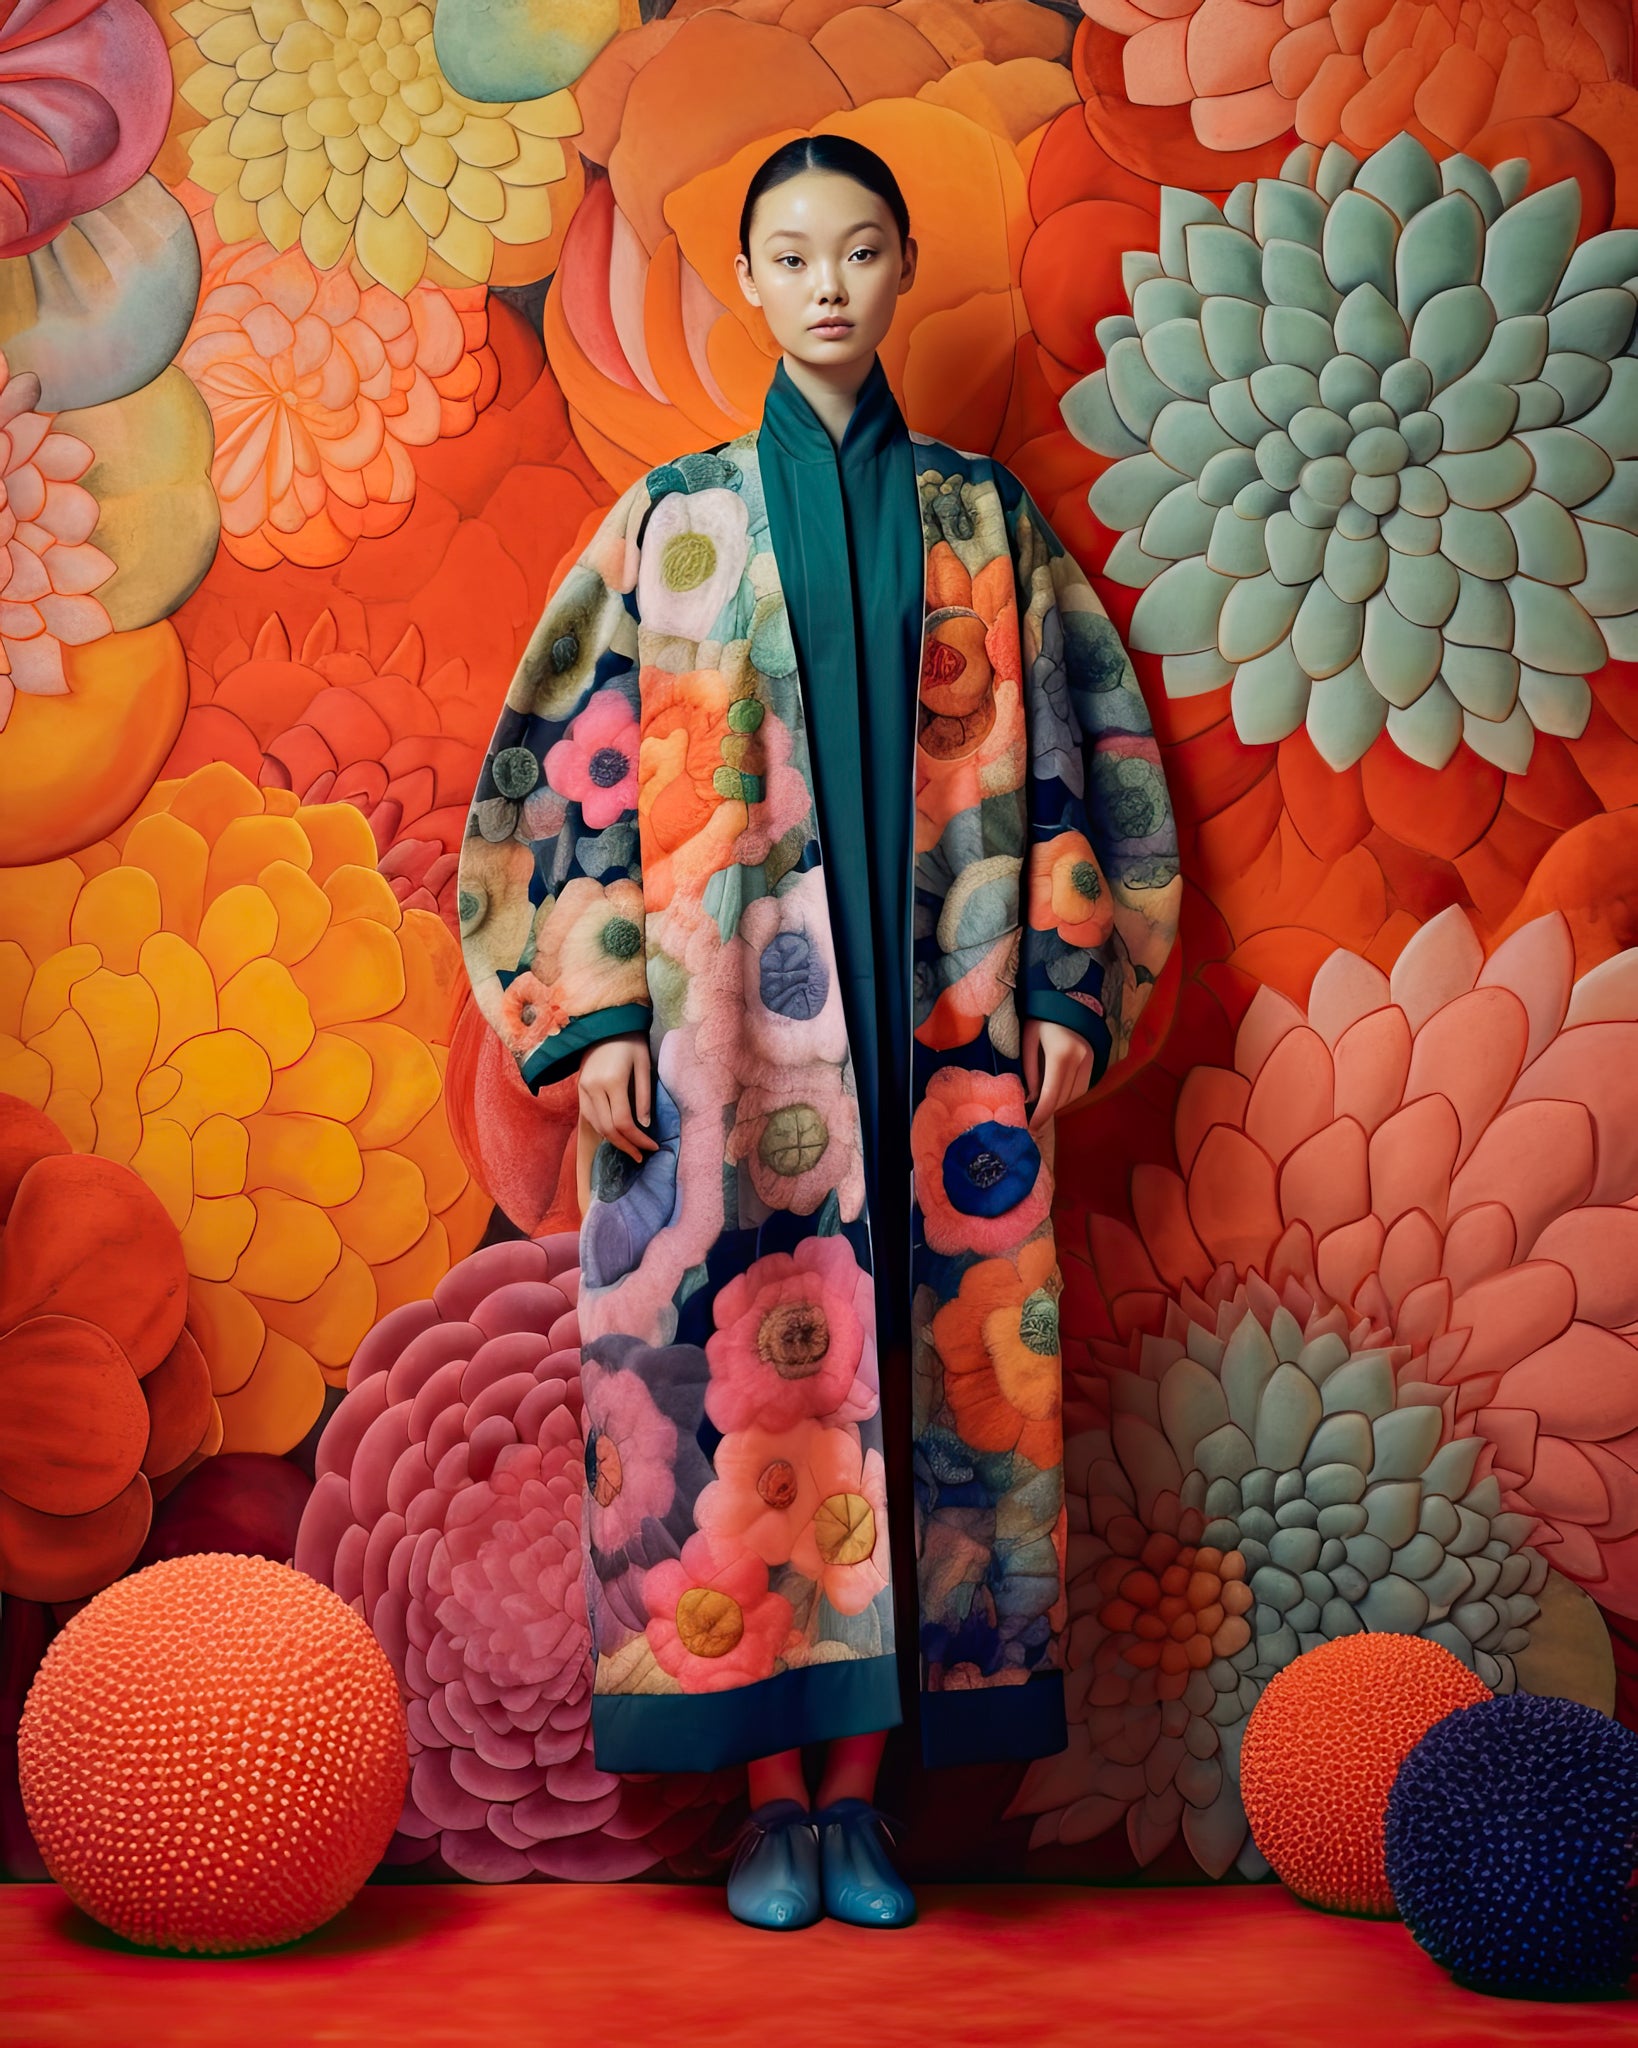 Fine art print featuring a woman dressed in a colorful, floral-patterned coat, standing against a vibrant background of large, abstract flowers in warm tones of orange, red, and yellow. This art print is a stunning example of an artwork print.